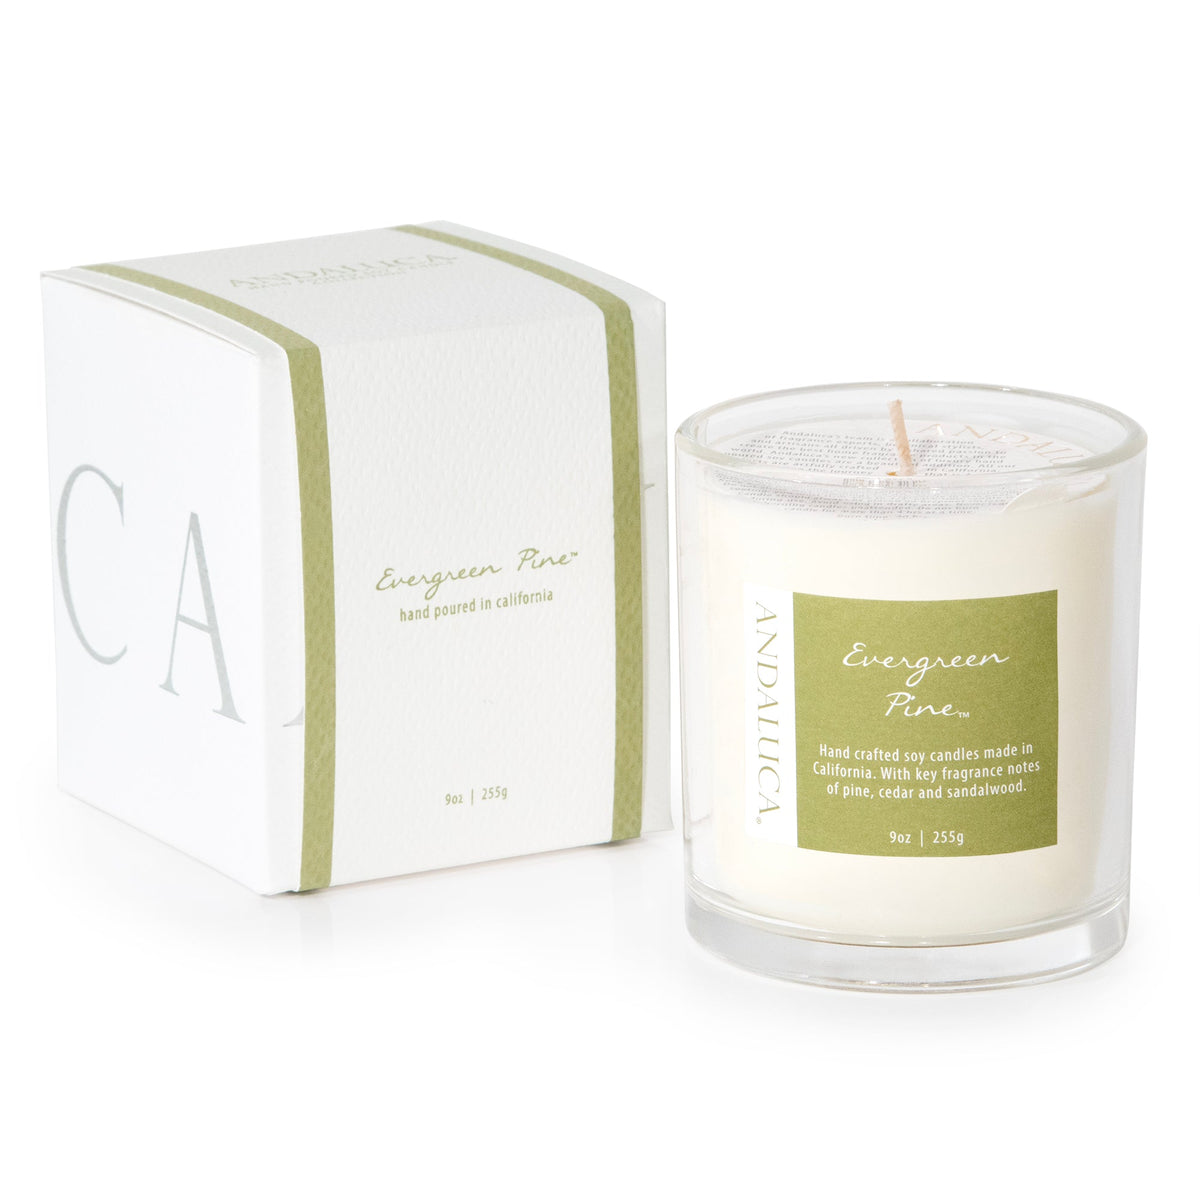 Gardens of Bali 9oz Candle by Andaluca Home